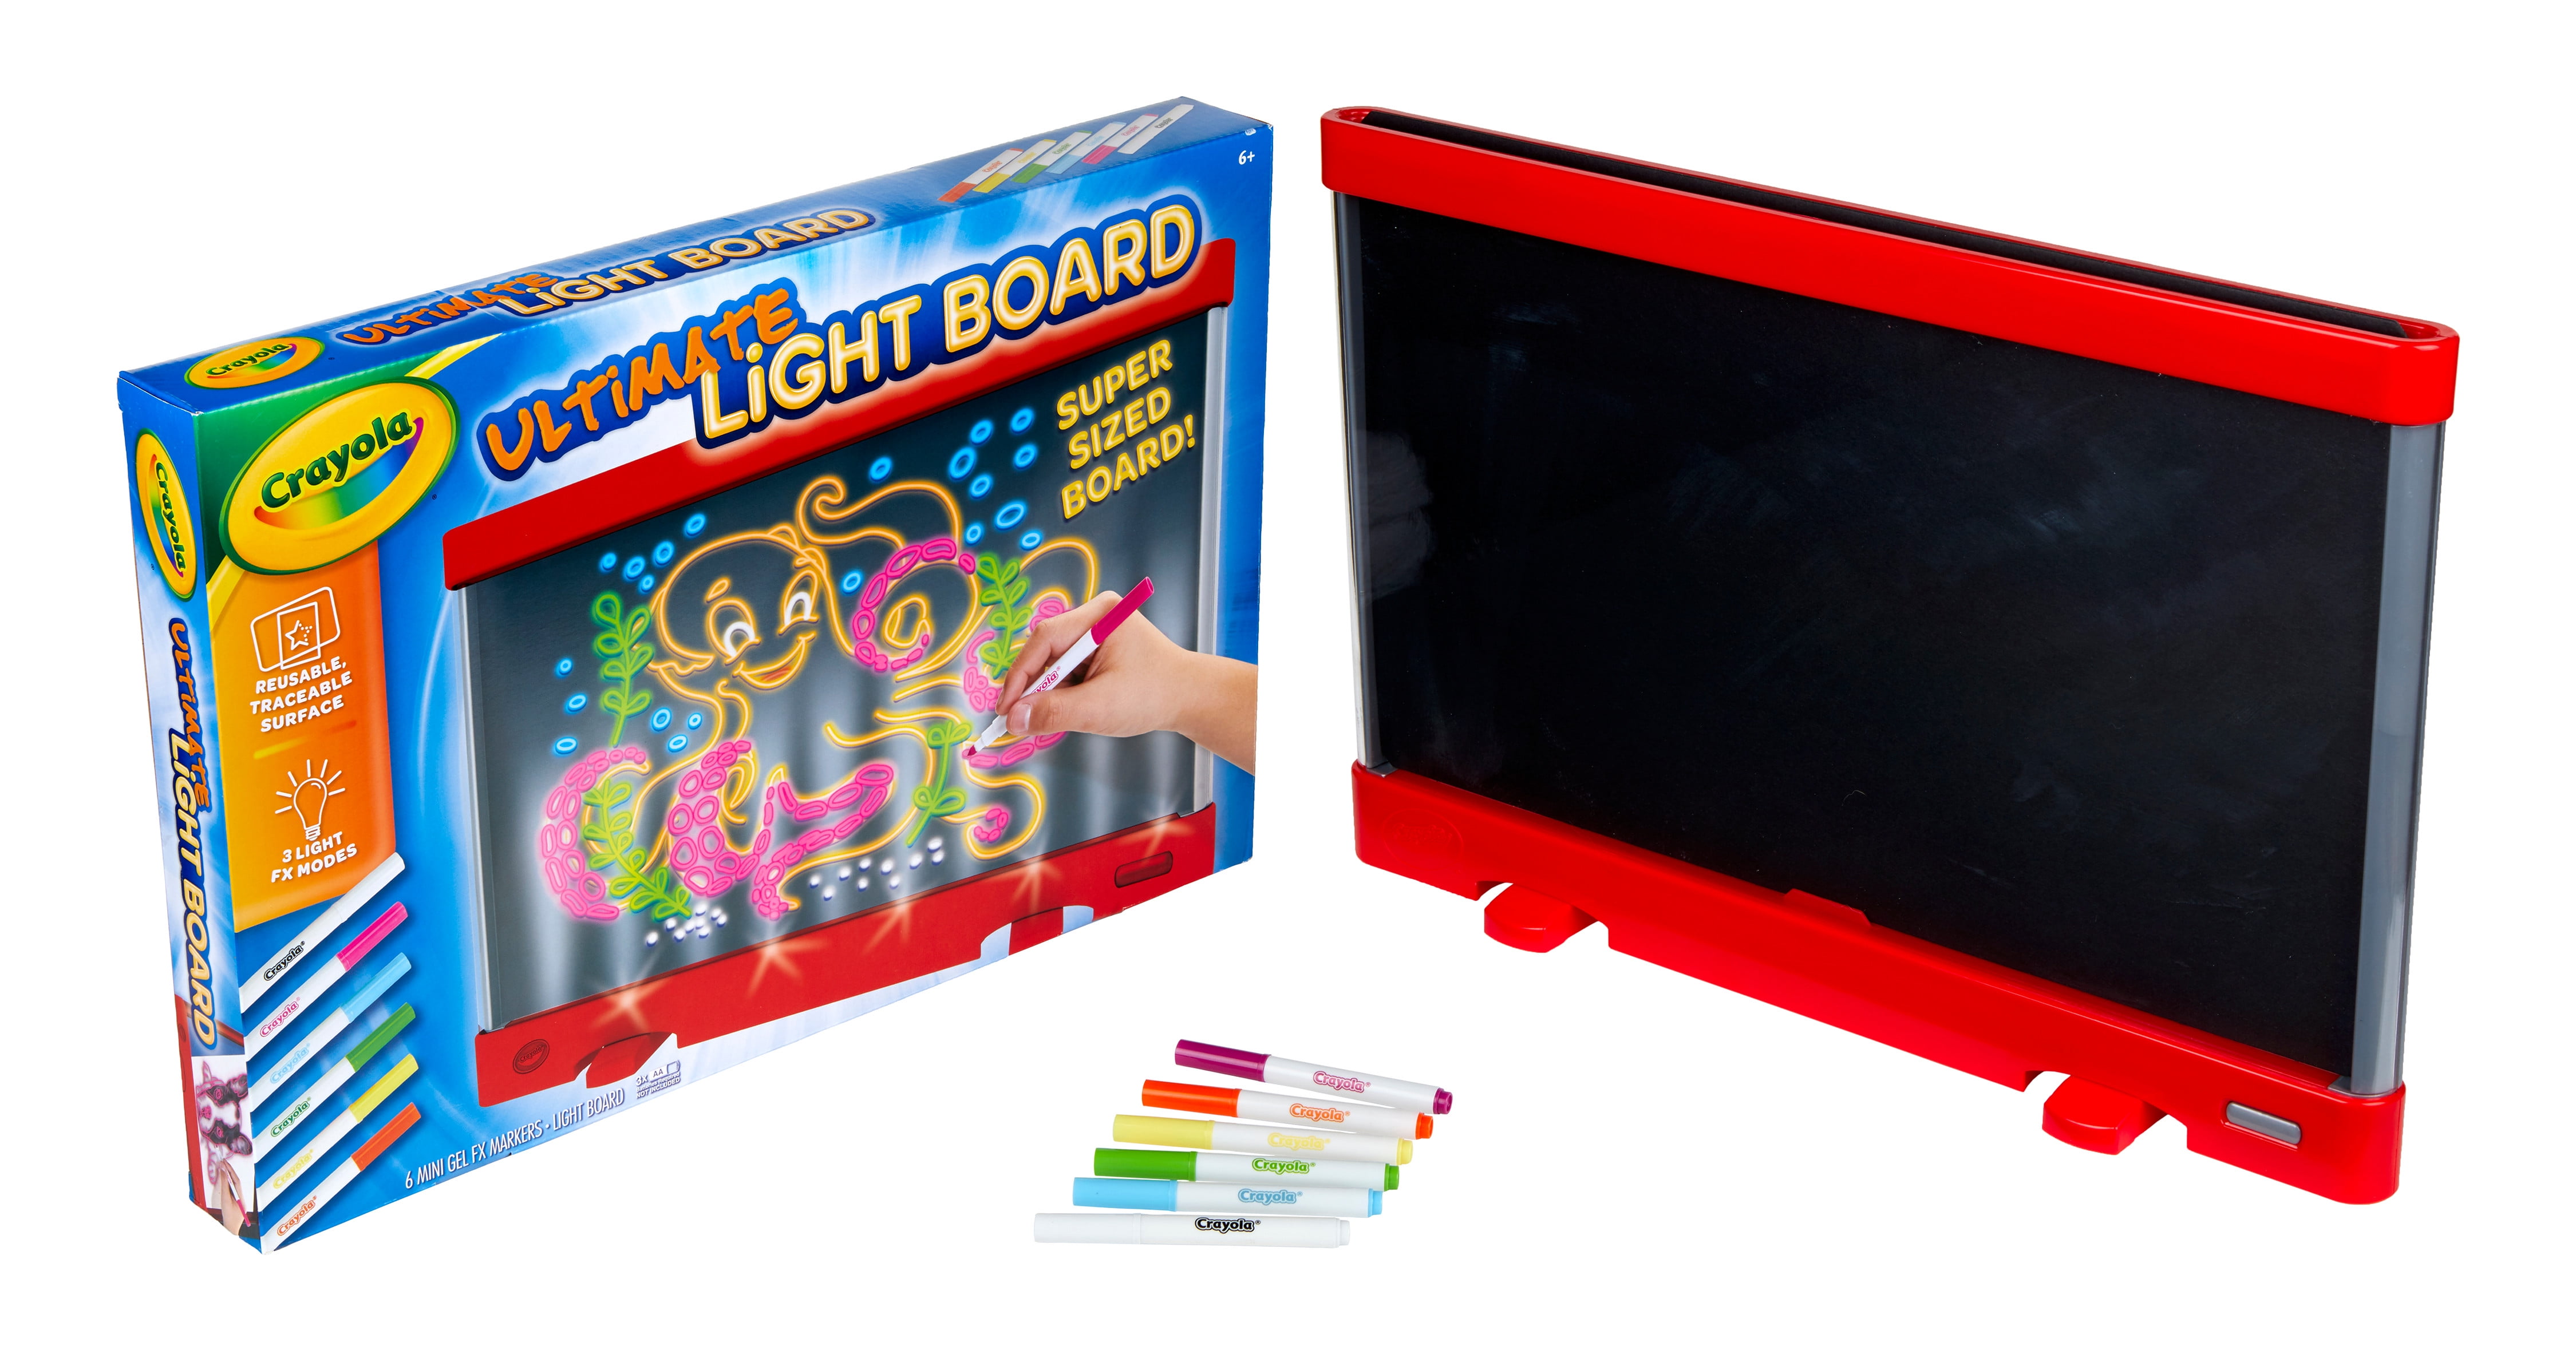 Crayola Ultimate Light Board, Red, Holiday Toy, Creative Gift for Kids,  Beginner Unisex Child 